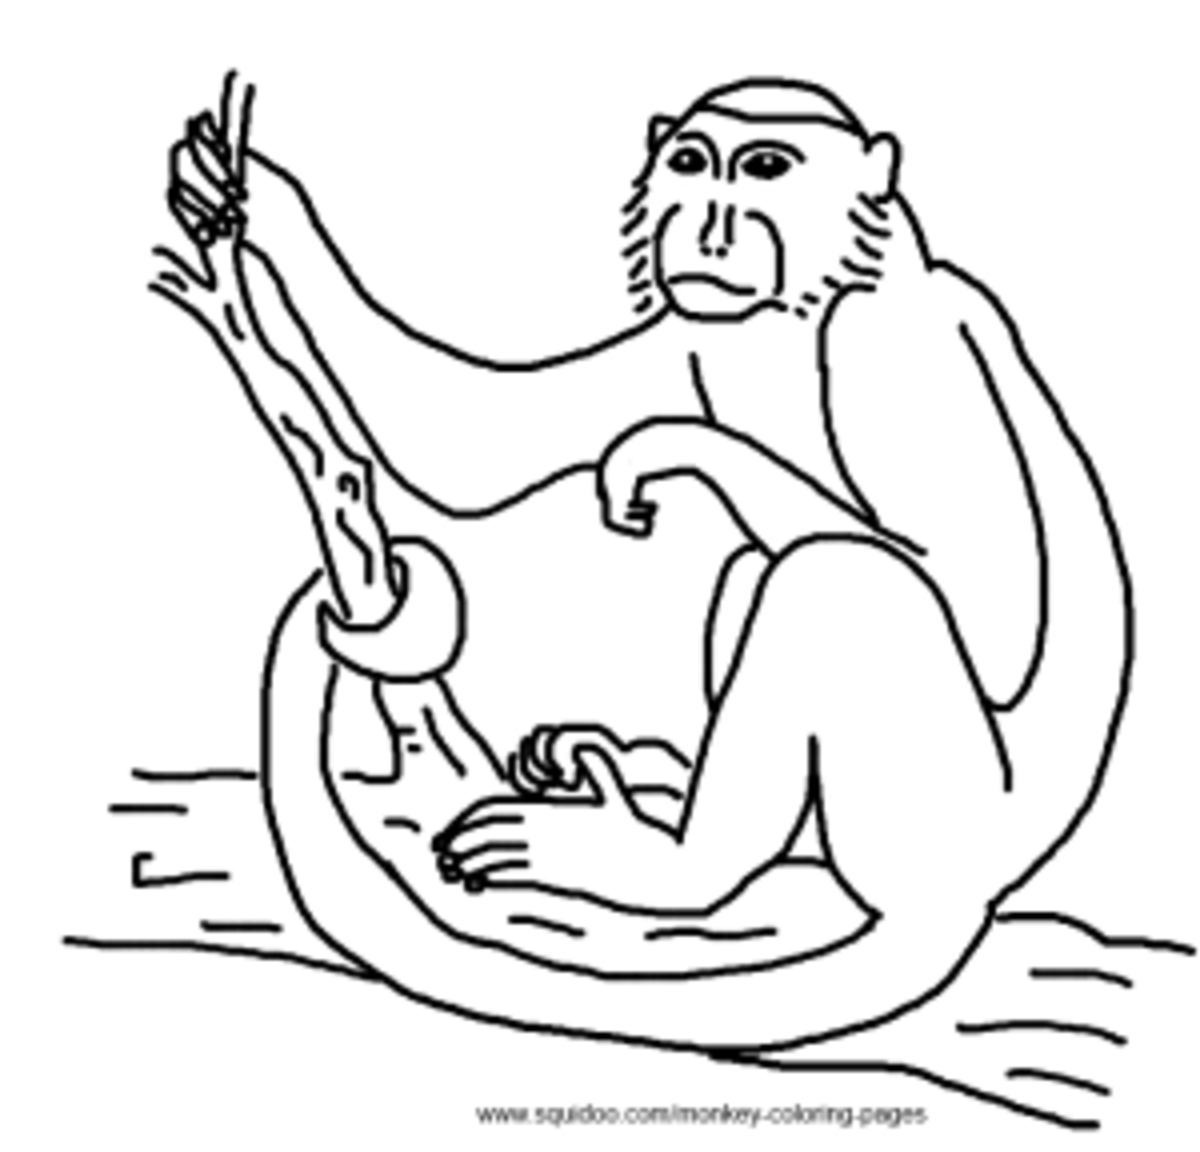 Capuchin Monkey Coloring Pages